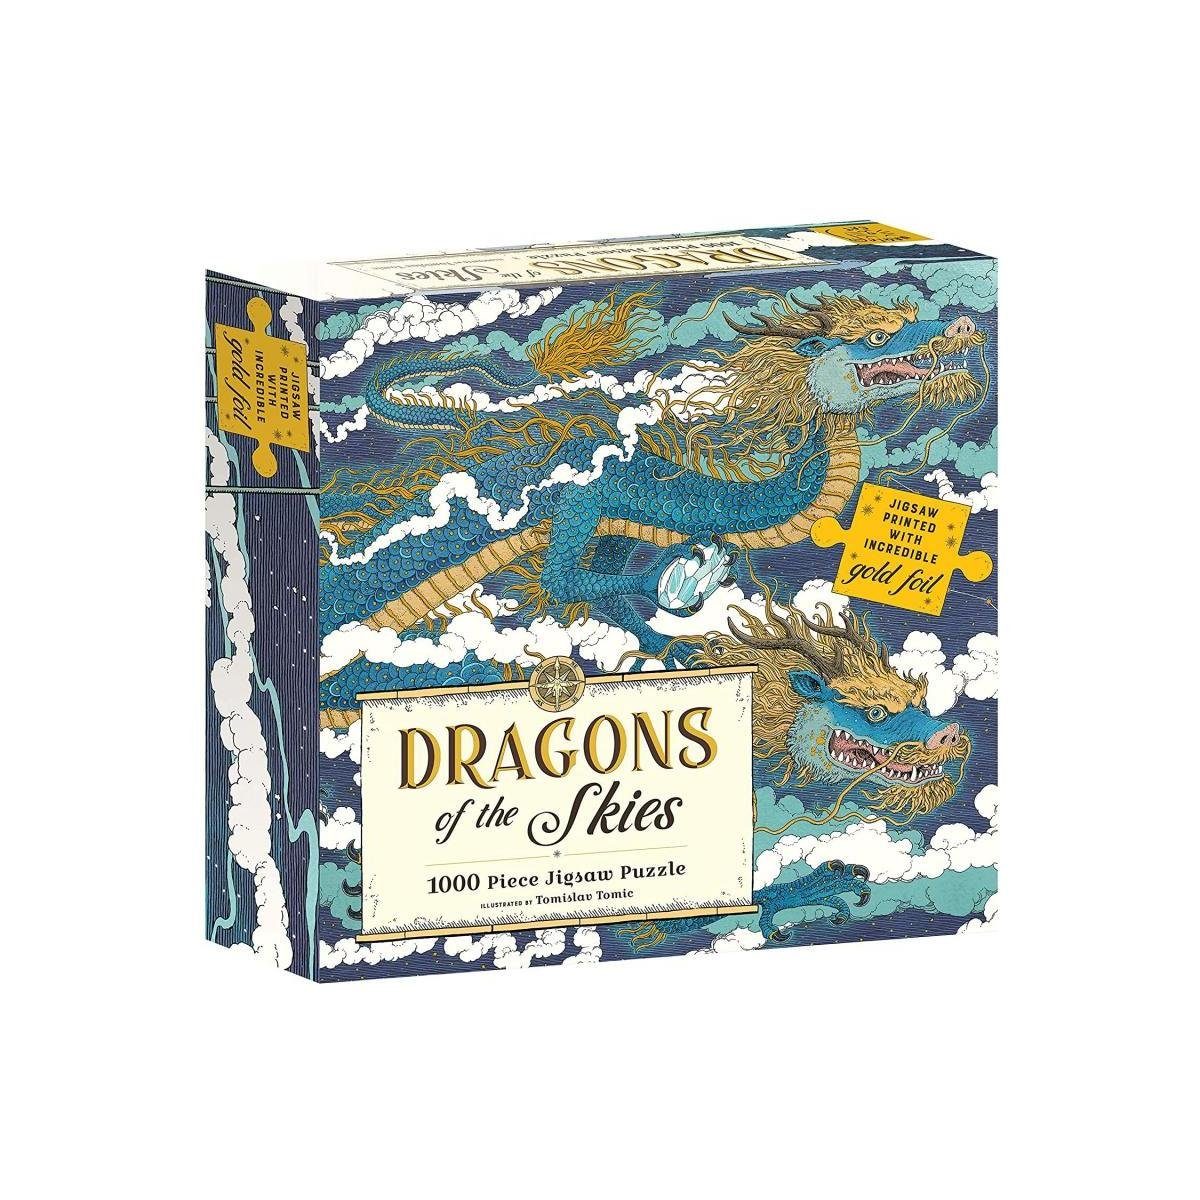 abrams&chronicle Puzzle 20151 - Dragons of the Skies - Puzzle, 1000 Teile,  1000 Puzzleteile